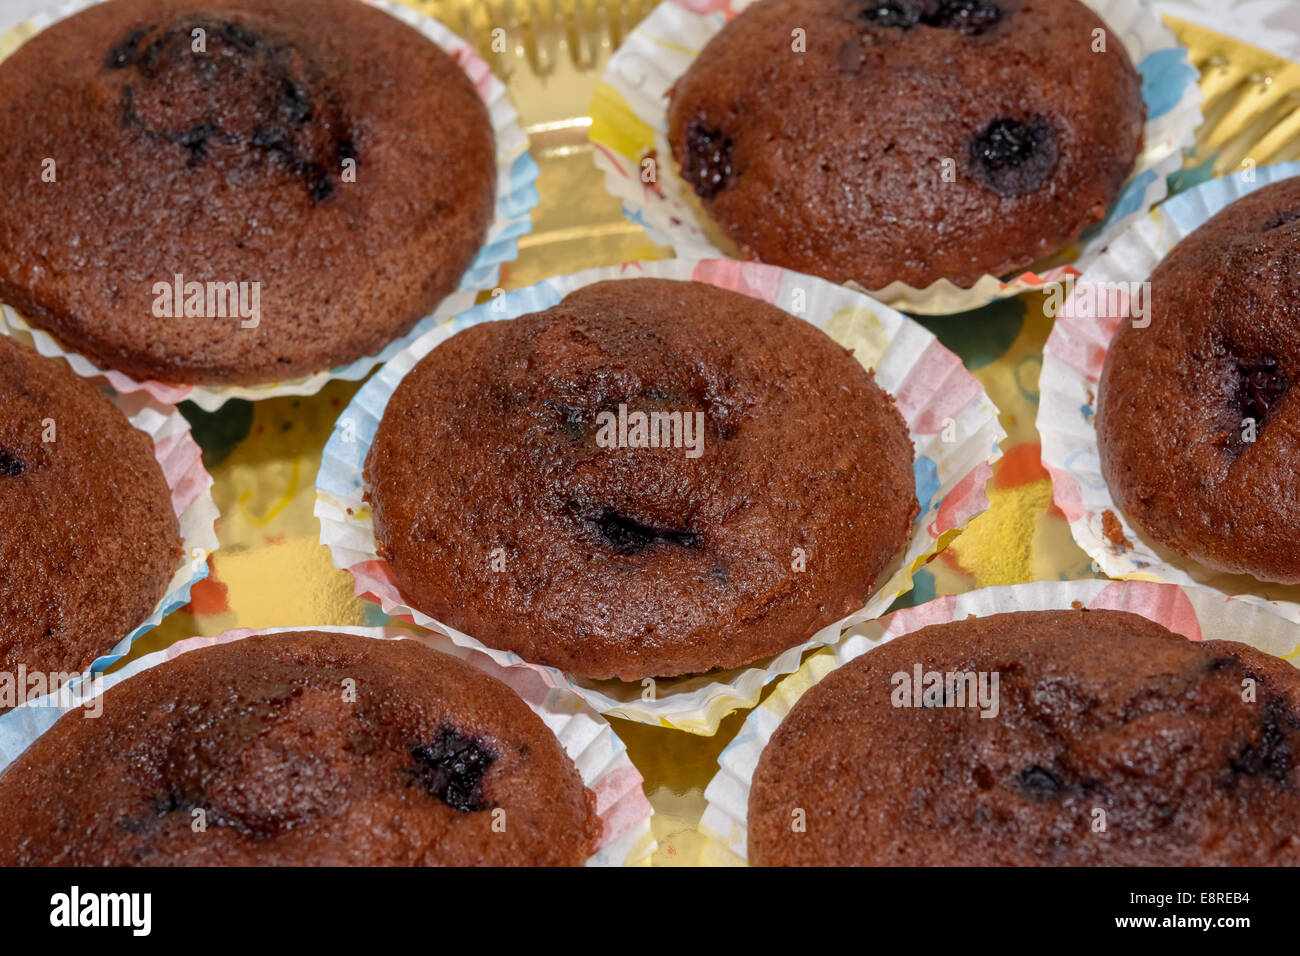 Delicious chocolate muffins on a plate for desert Stock Photo